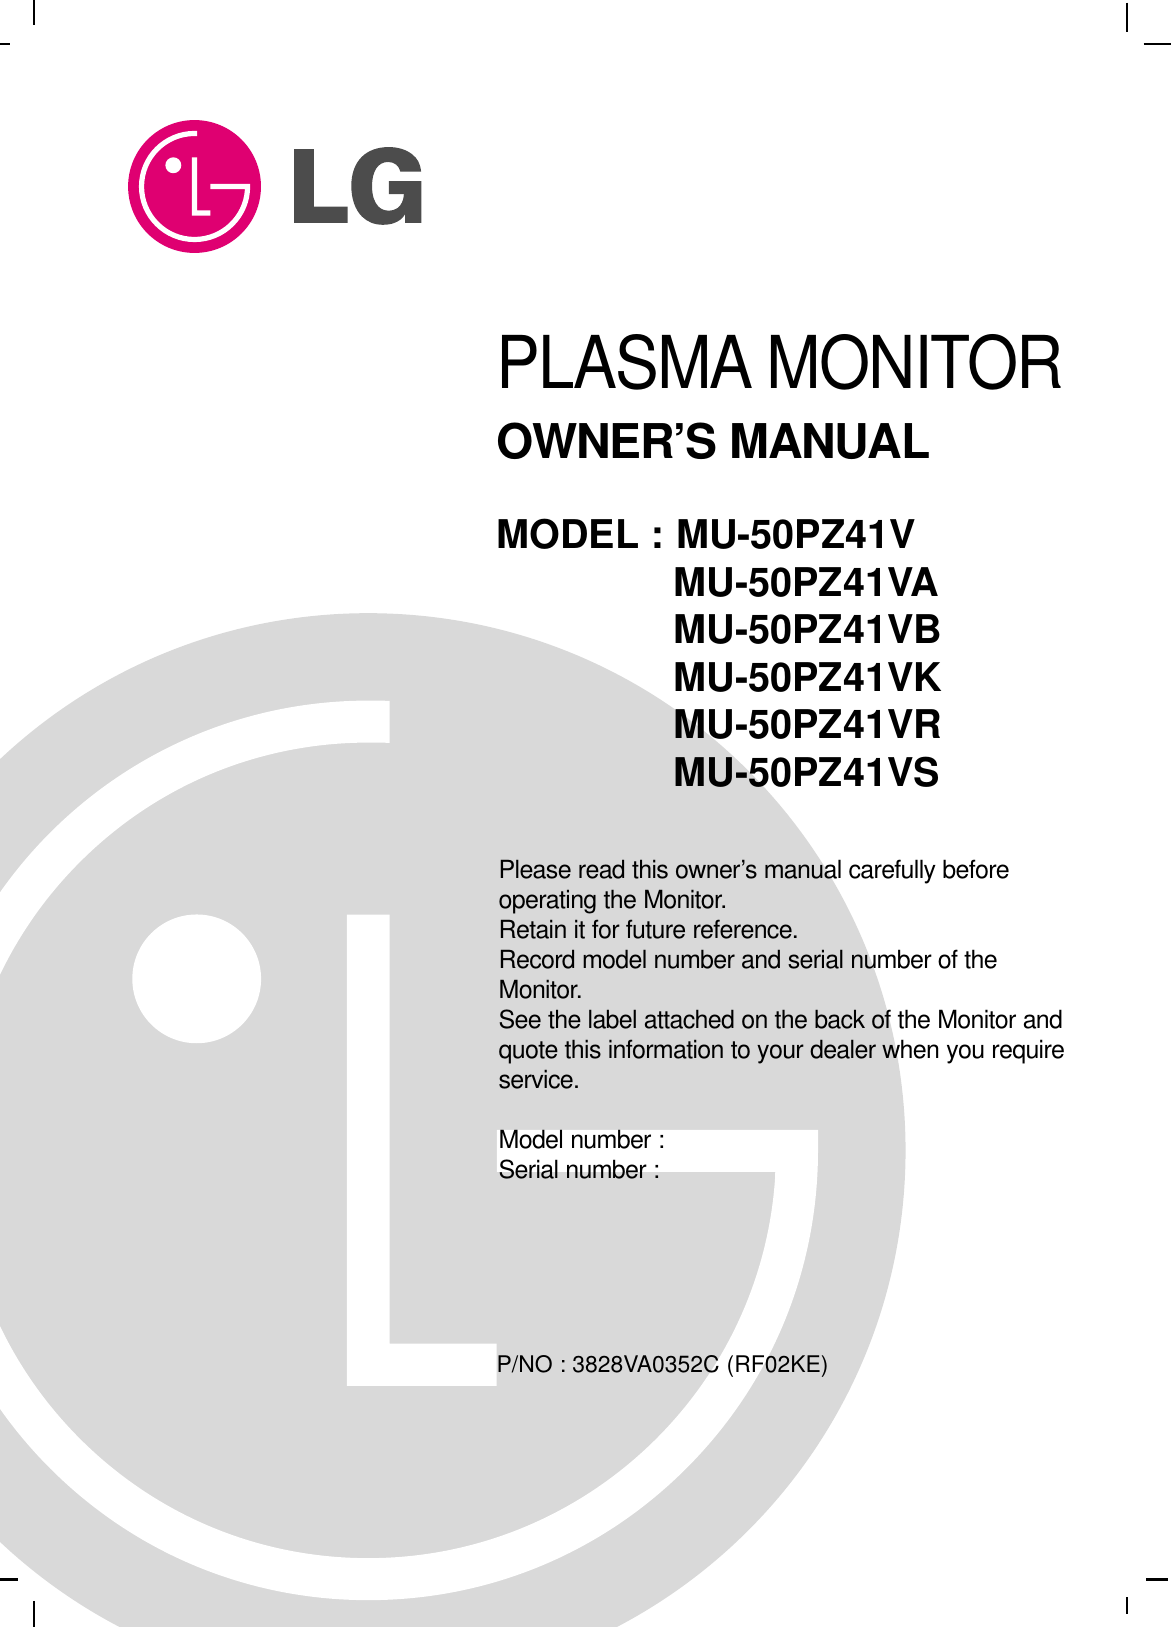 PLASMA MONITOROWNER’S MANUALPlease read this owner’s manual carefully beforeoperating the Monitor.Retain it for future reference.Record model number and serial number of theMonitor.See the label attached on the back of the Monitor andquote this information to your dealer when you requireservice.Model number : Serial number : MODEL : MU-50PZ41VMU-50PZ41VAMU-50PZ41VBMU-50PZ41VKMU-50PZ41VRMU-50PZ41VSP/NO : 3828VA0352C (RF02KE)